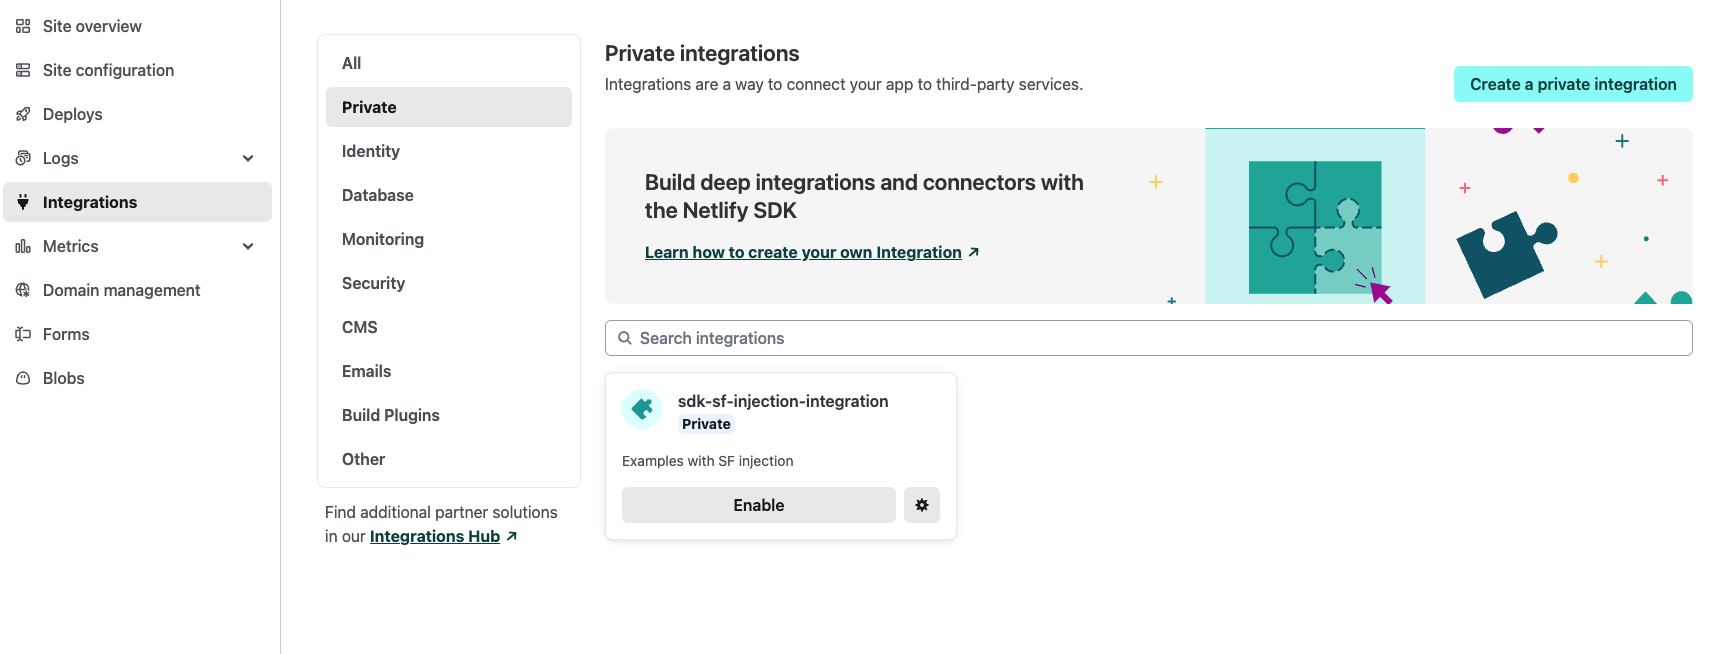 Enable your integration by selecting 'enable' on the integration card in the Netlify UI